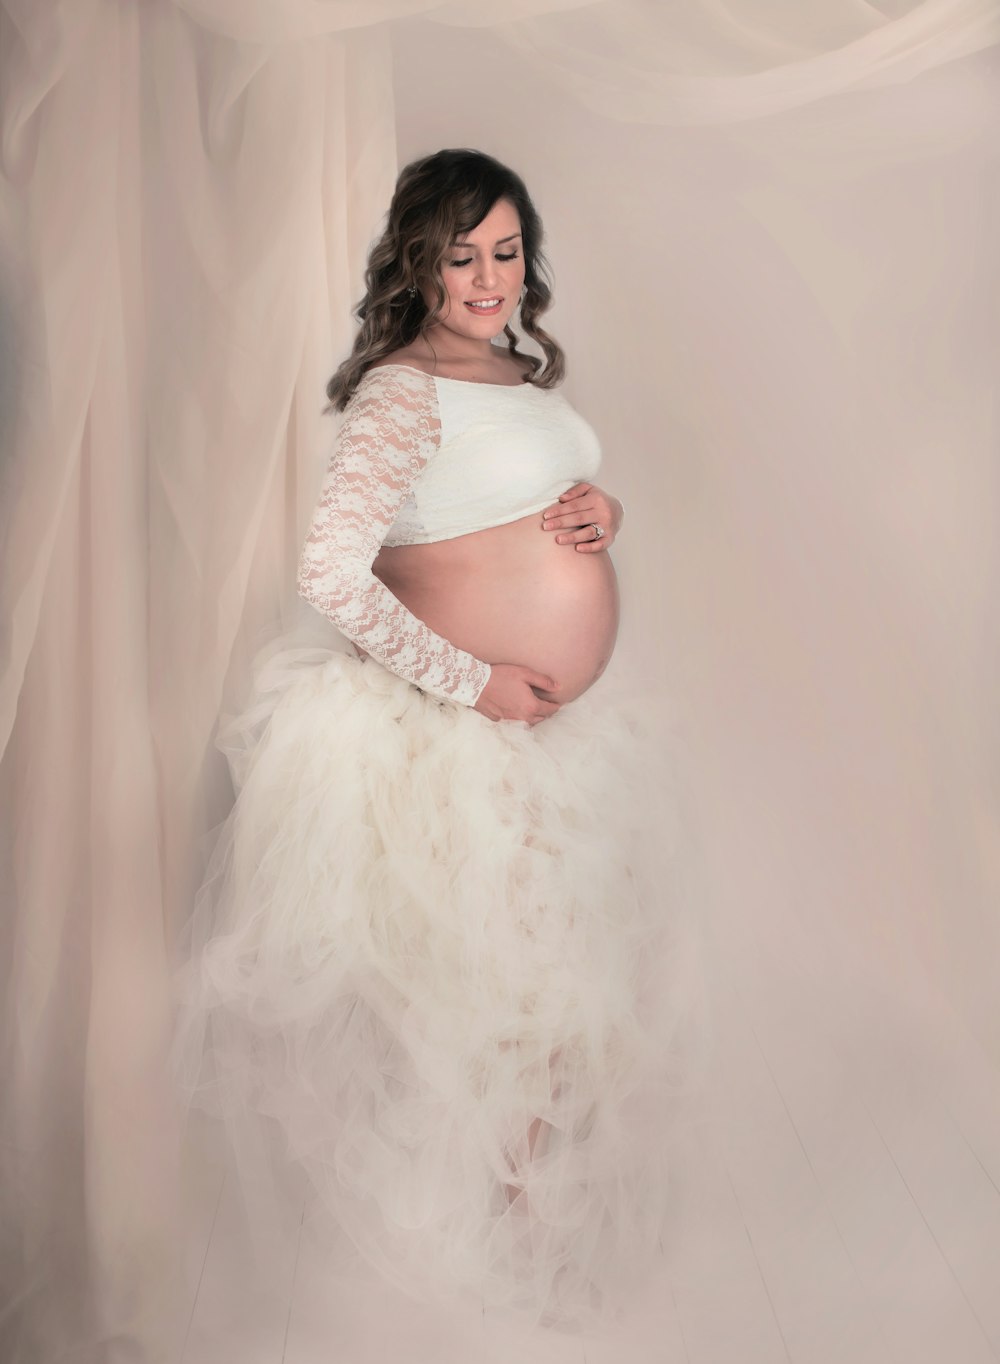 pregnant woman wearing white long-sleeved crop-top and white ruffled skirt standing against white covered wall